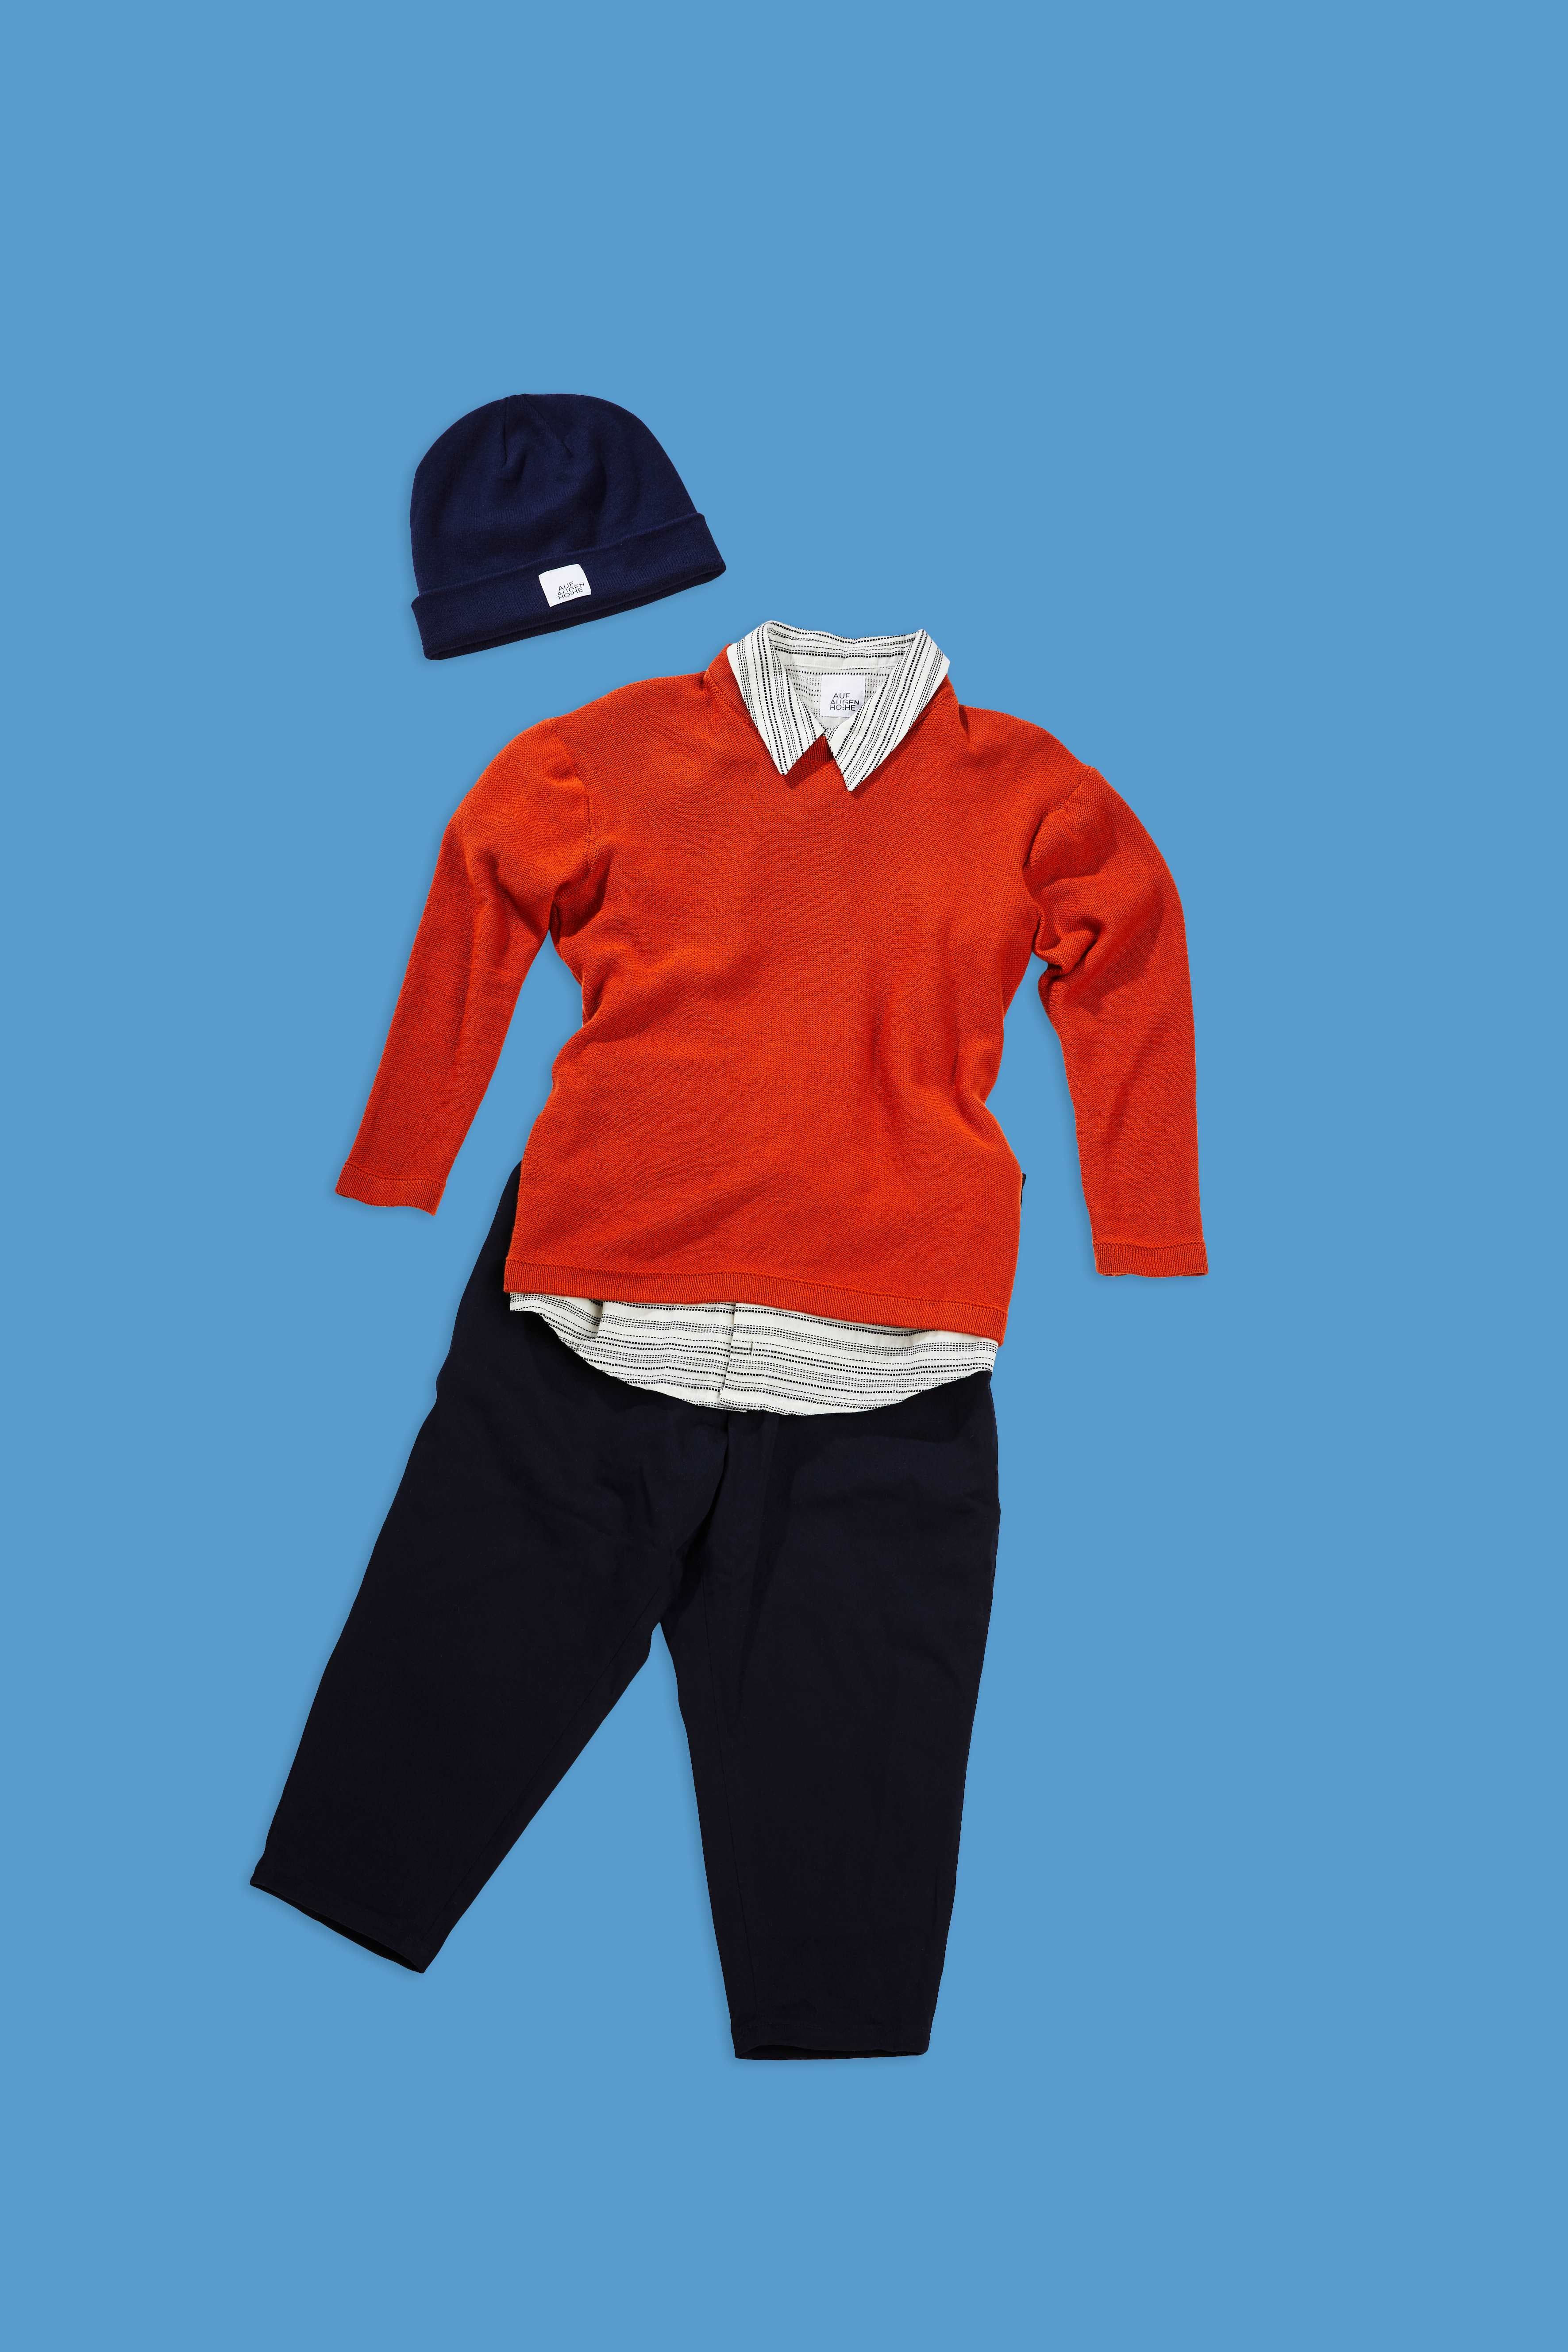 rusty red pullover with striped shirt, black pants and beanie on blue background